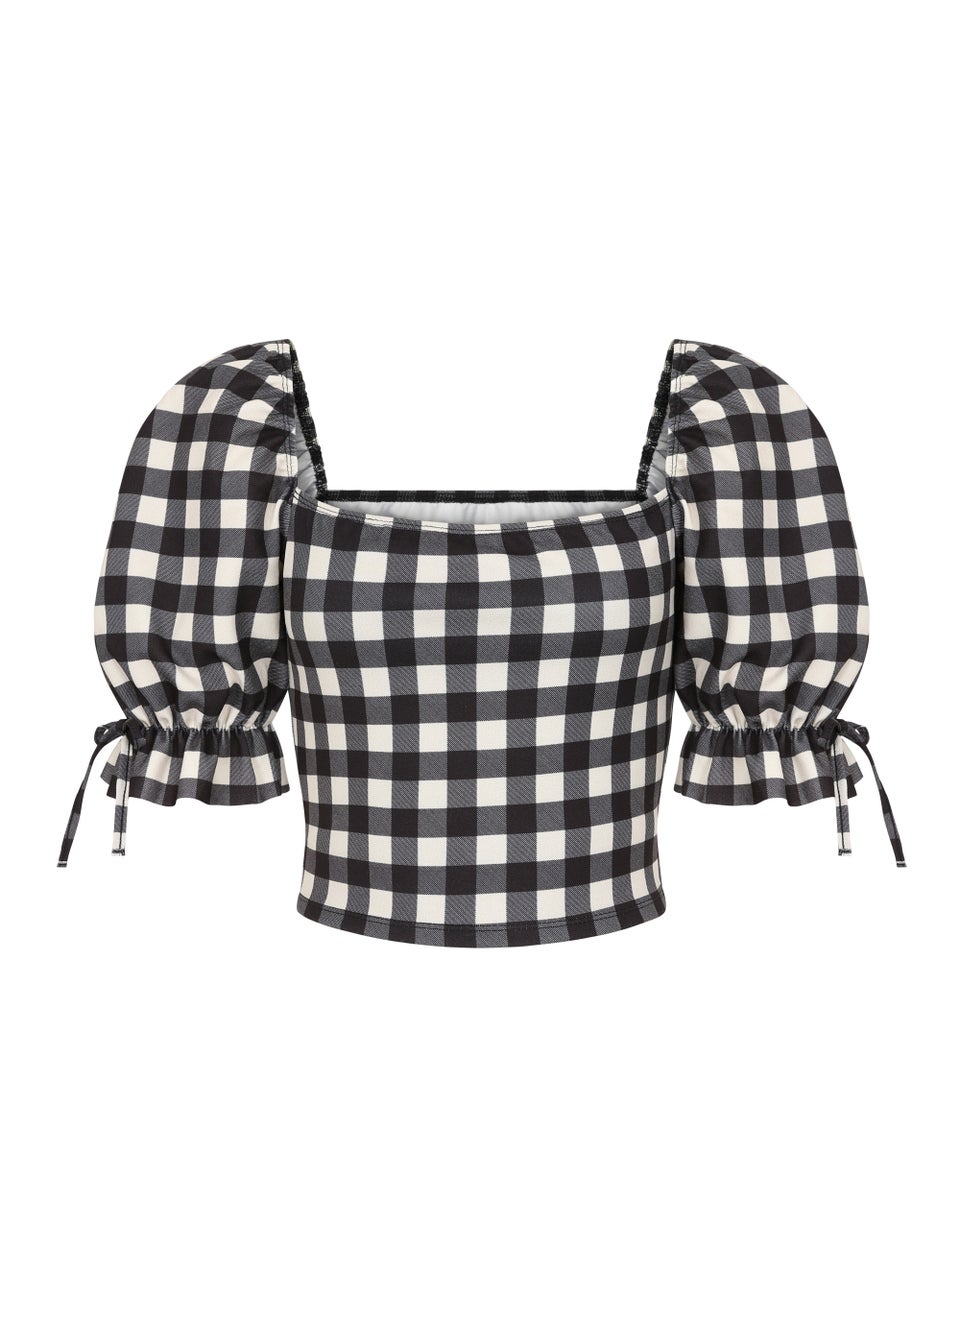 Girls on Film by Dani Dyer Black Gingham Co-Ord Top - Matalan